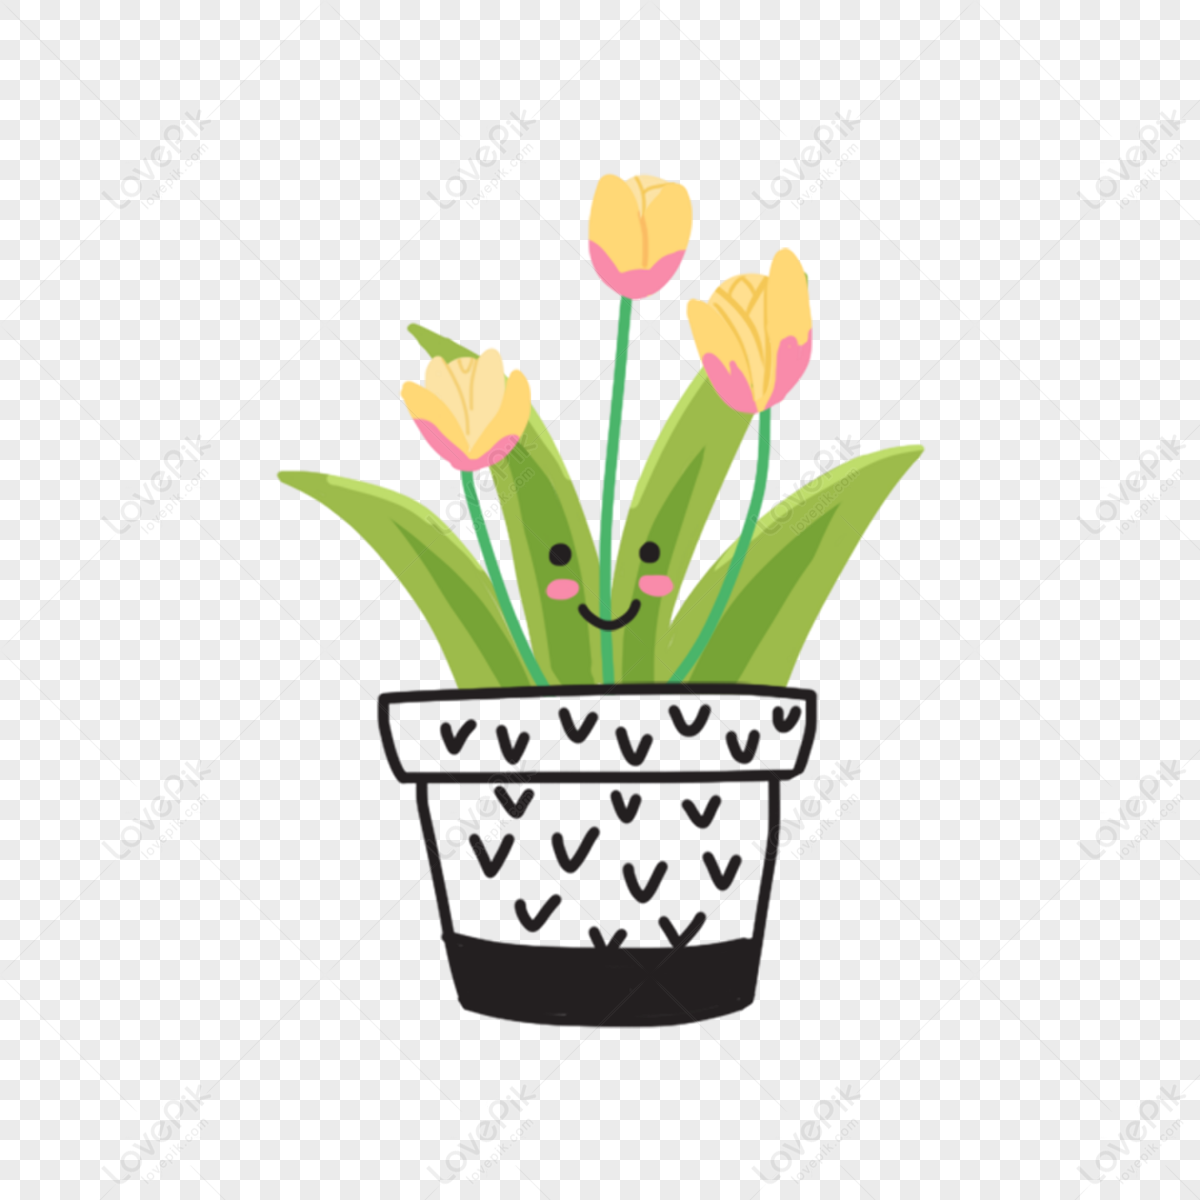 How to Draw a Potted Plant - Really Easy Drawing Tutorial